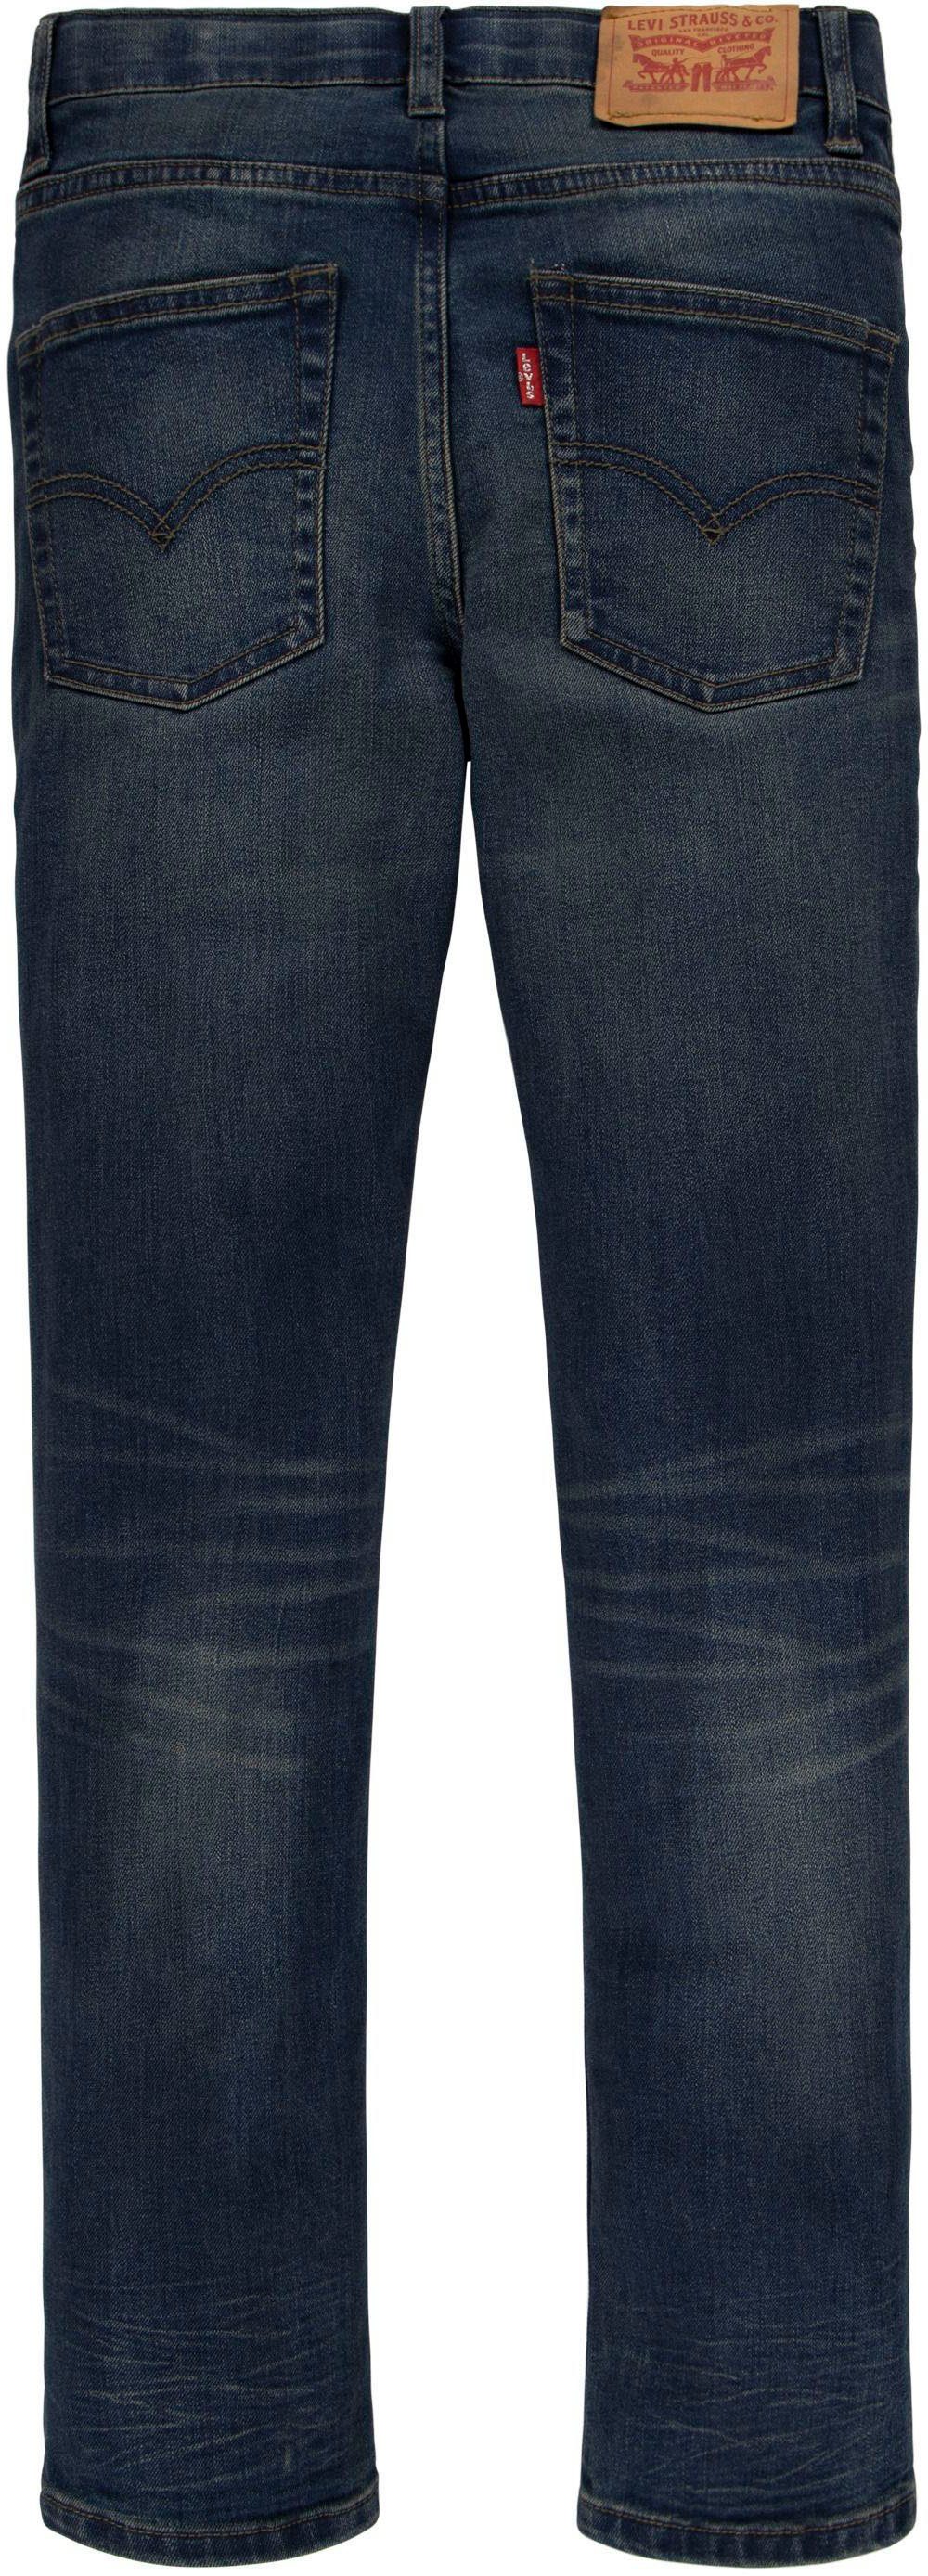 mixed SKINNY 510 for Skinny-fit-Jeans JEANS Kids FIT Levi's® BOYS tape